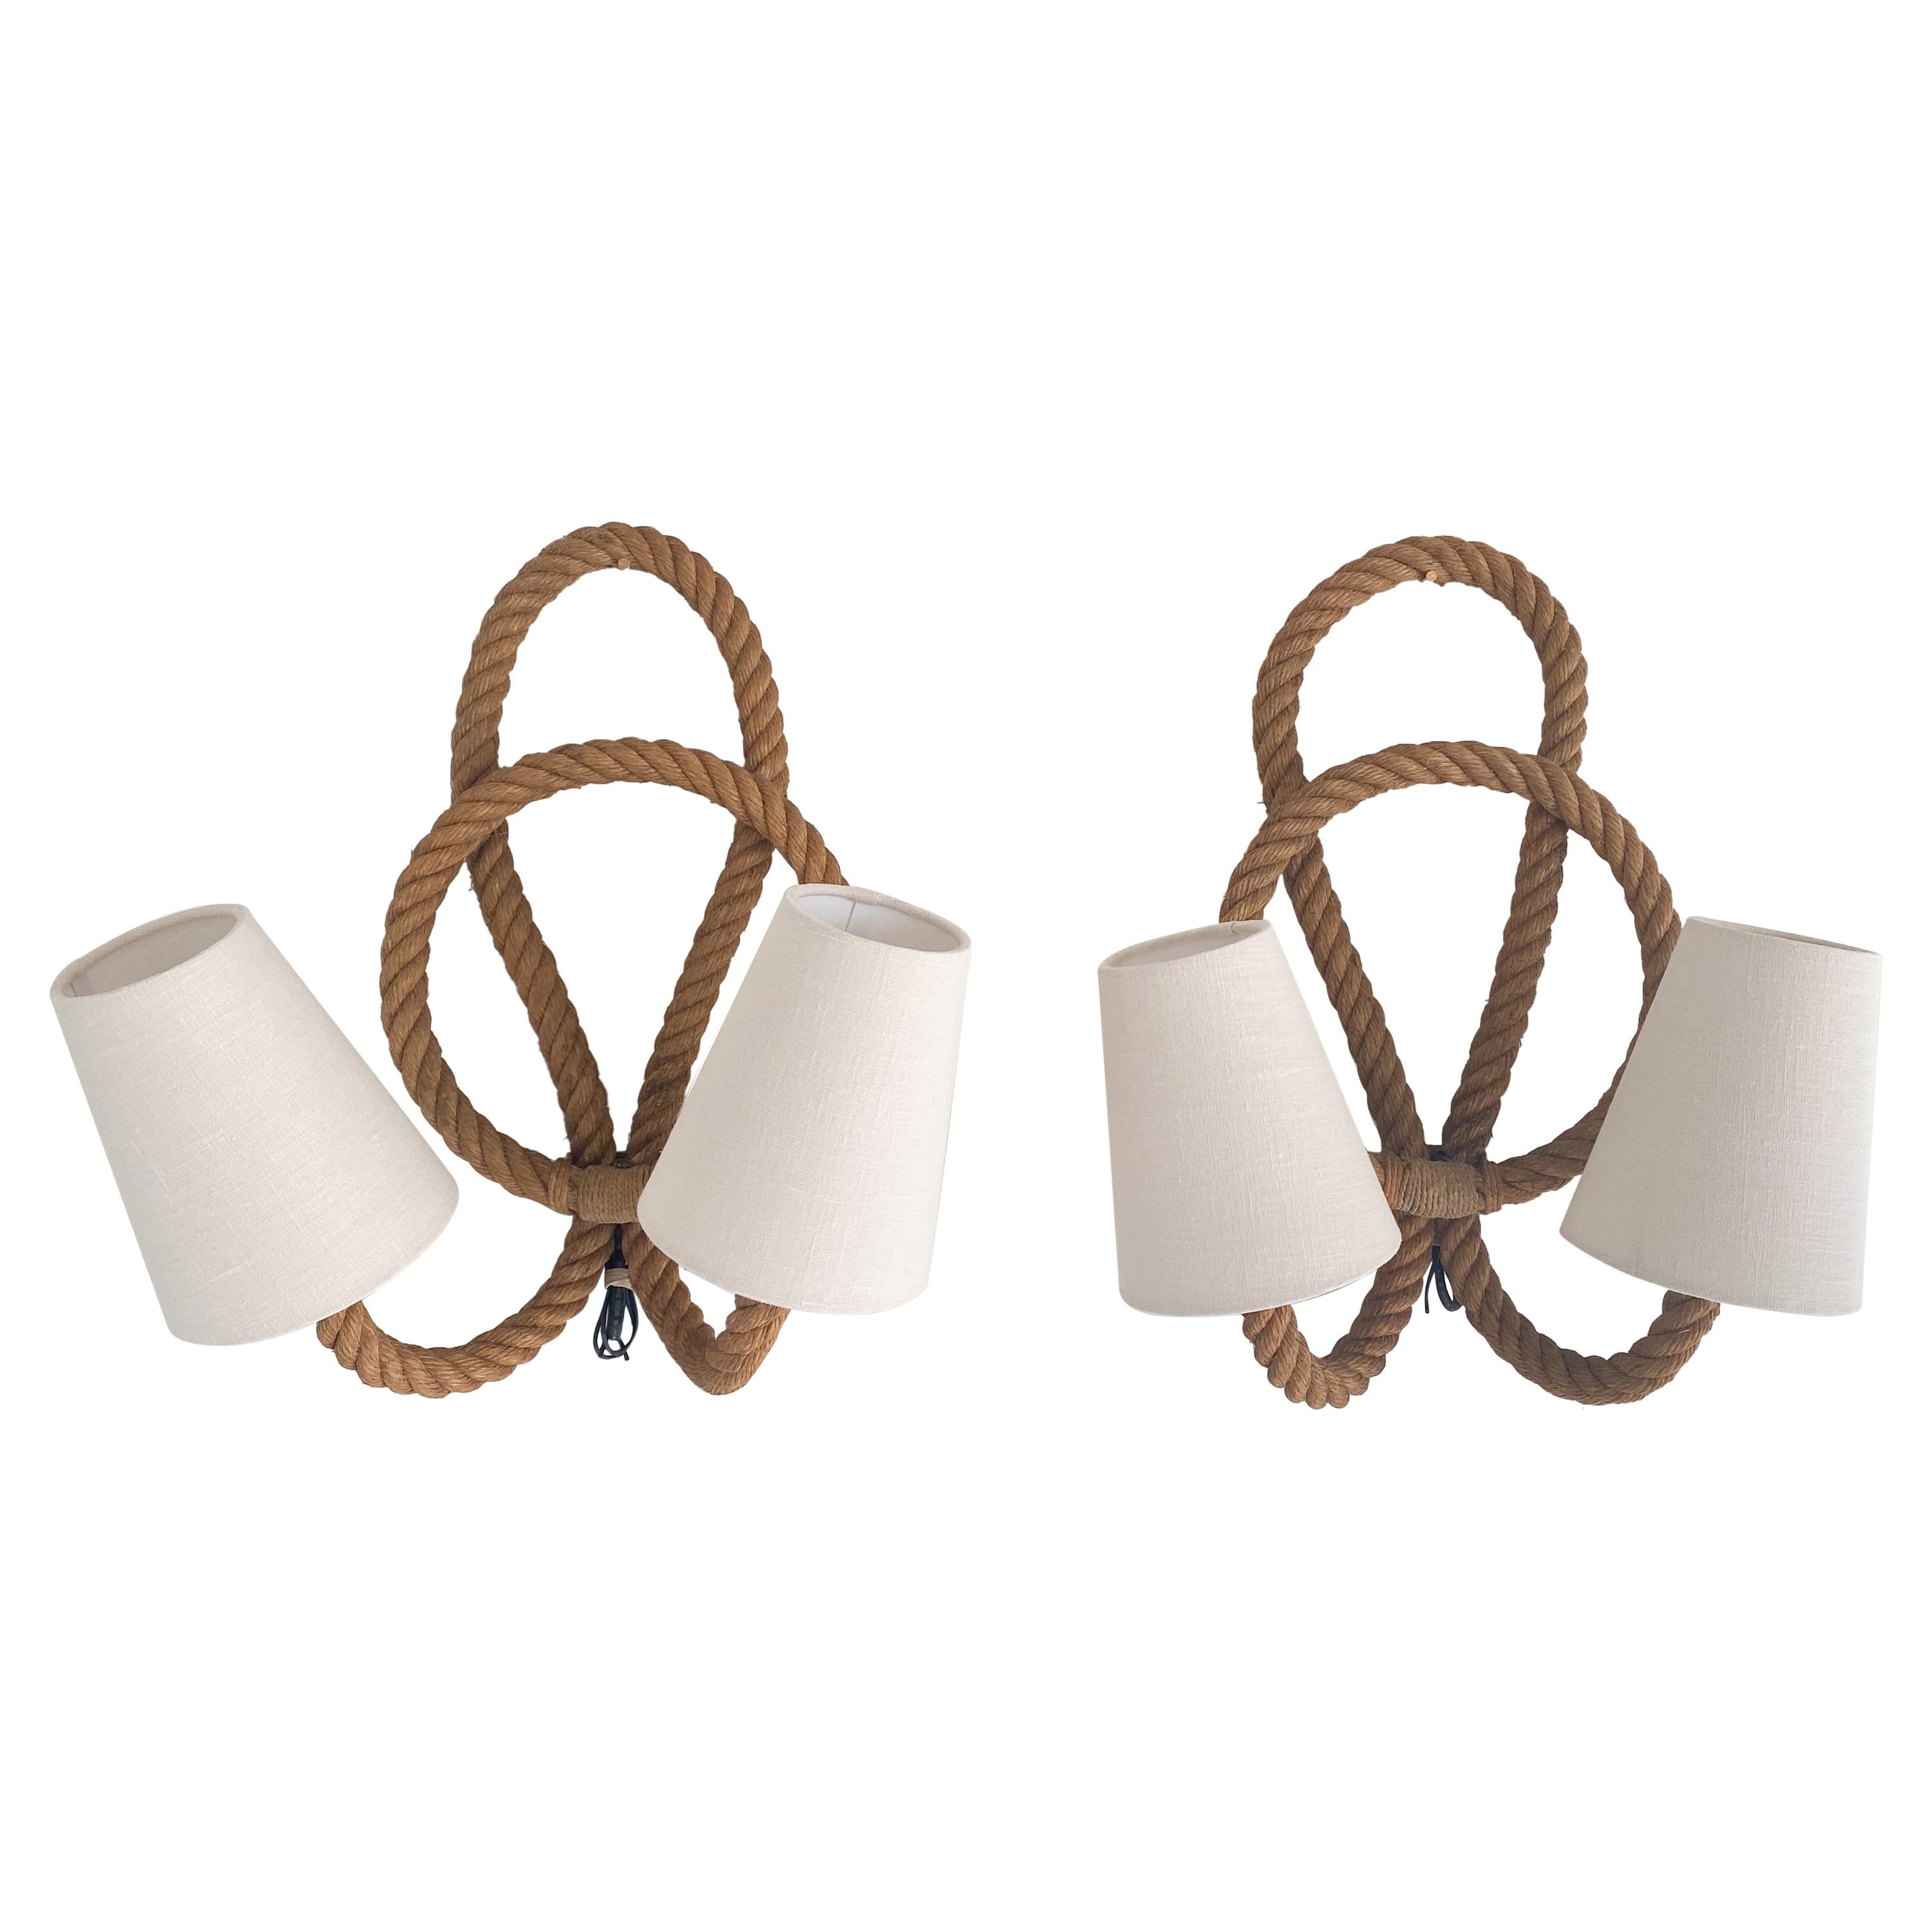 Pair of Audoux and Minet Rope Sconces